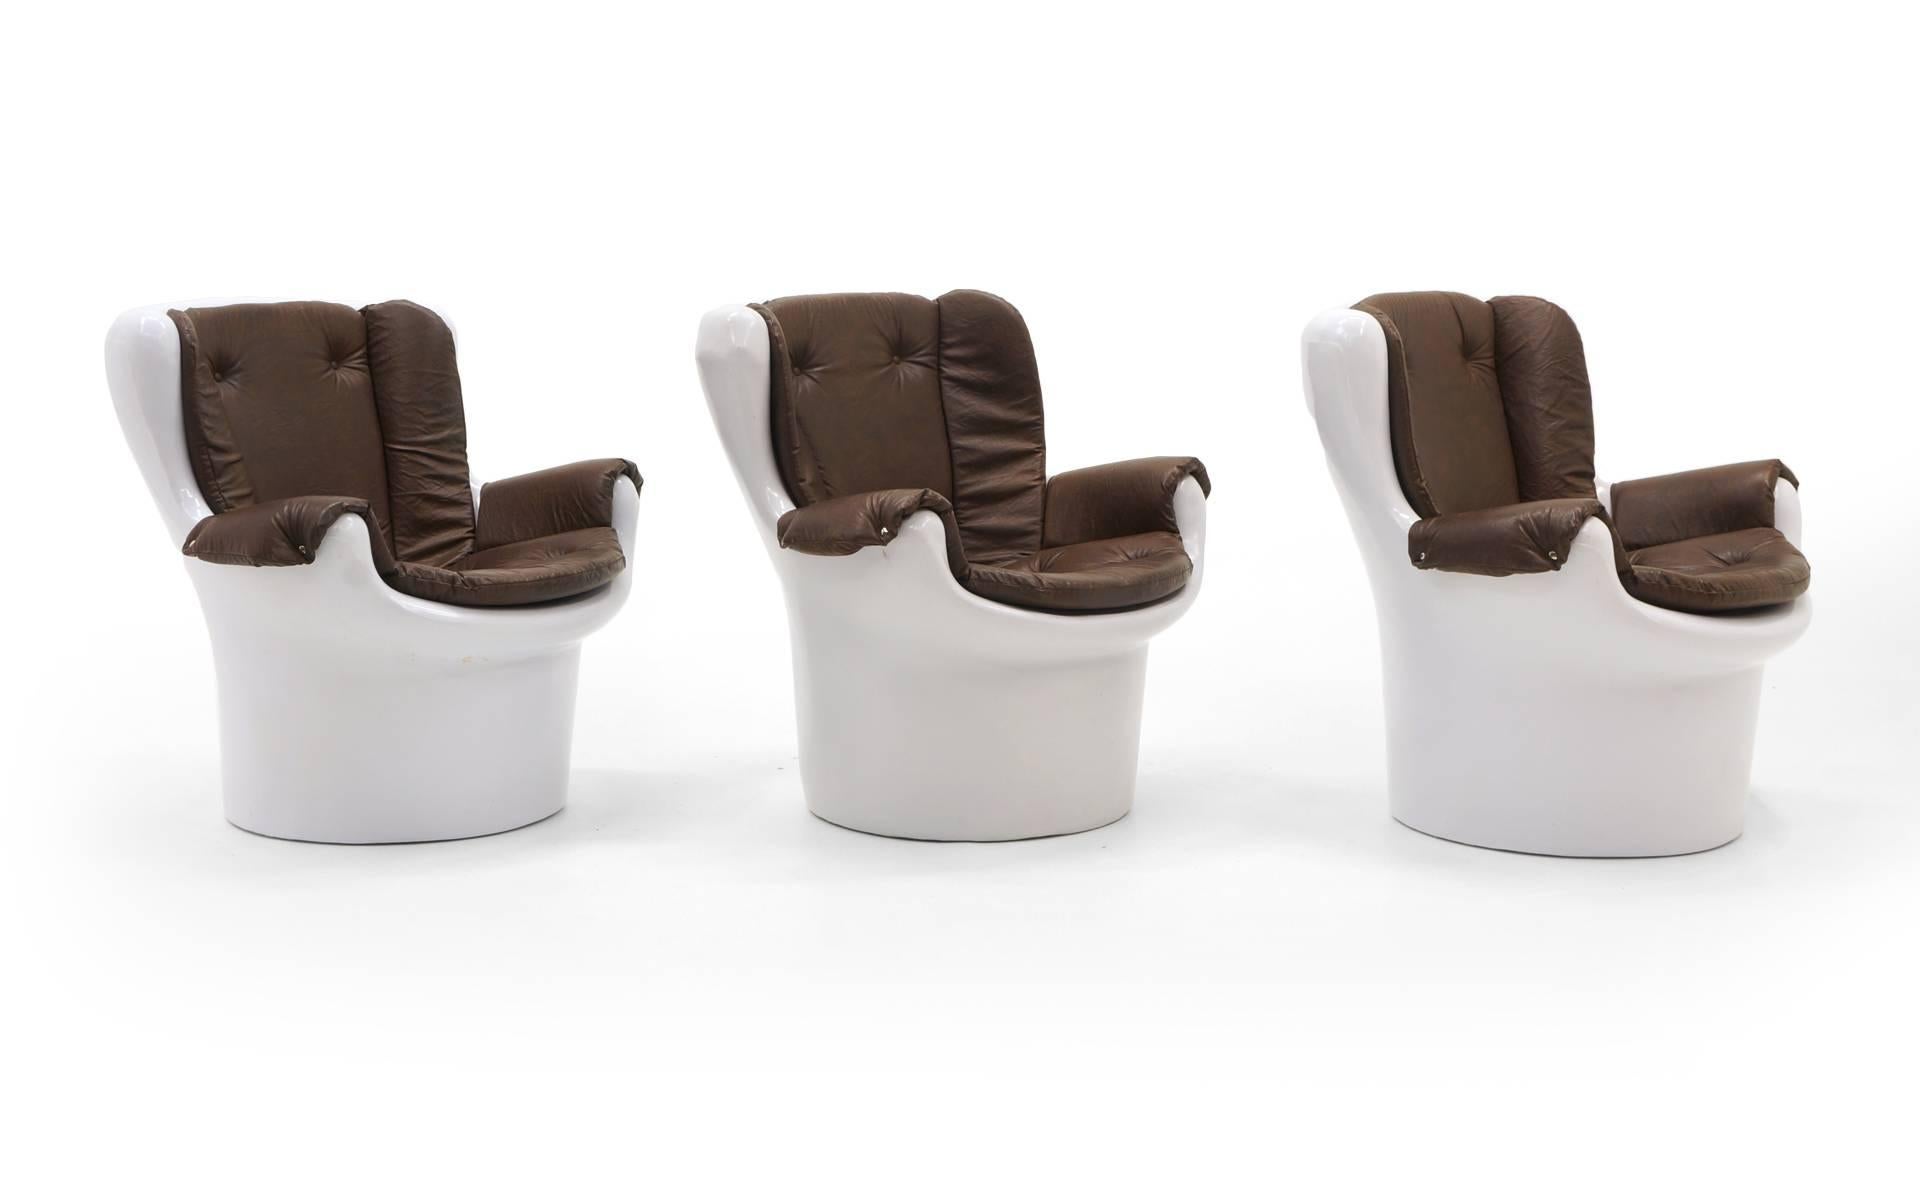 ONLY ONE AVAILABLE.  Molded plastic lounge chairs. Fun, kitschy, mod design. These would be great chairs for a gaming room or party room. Vinyl removable brown vinyl seat pads and arms.